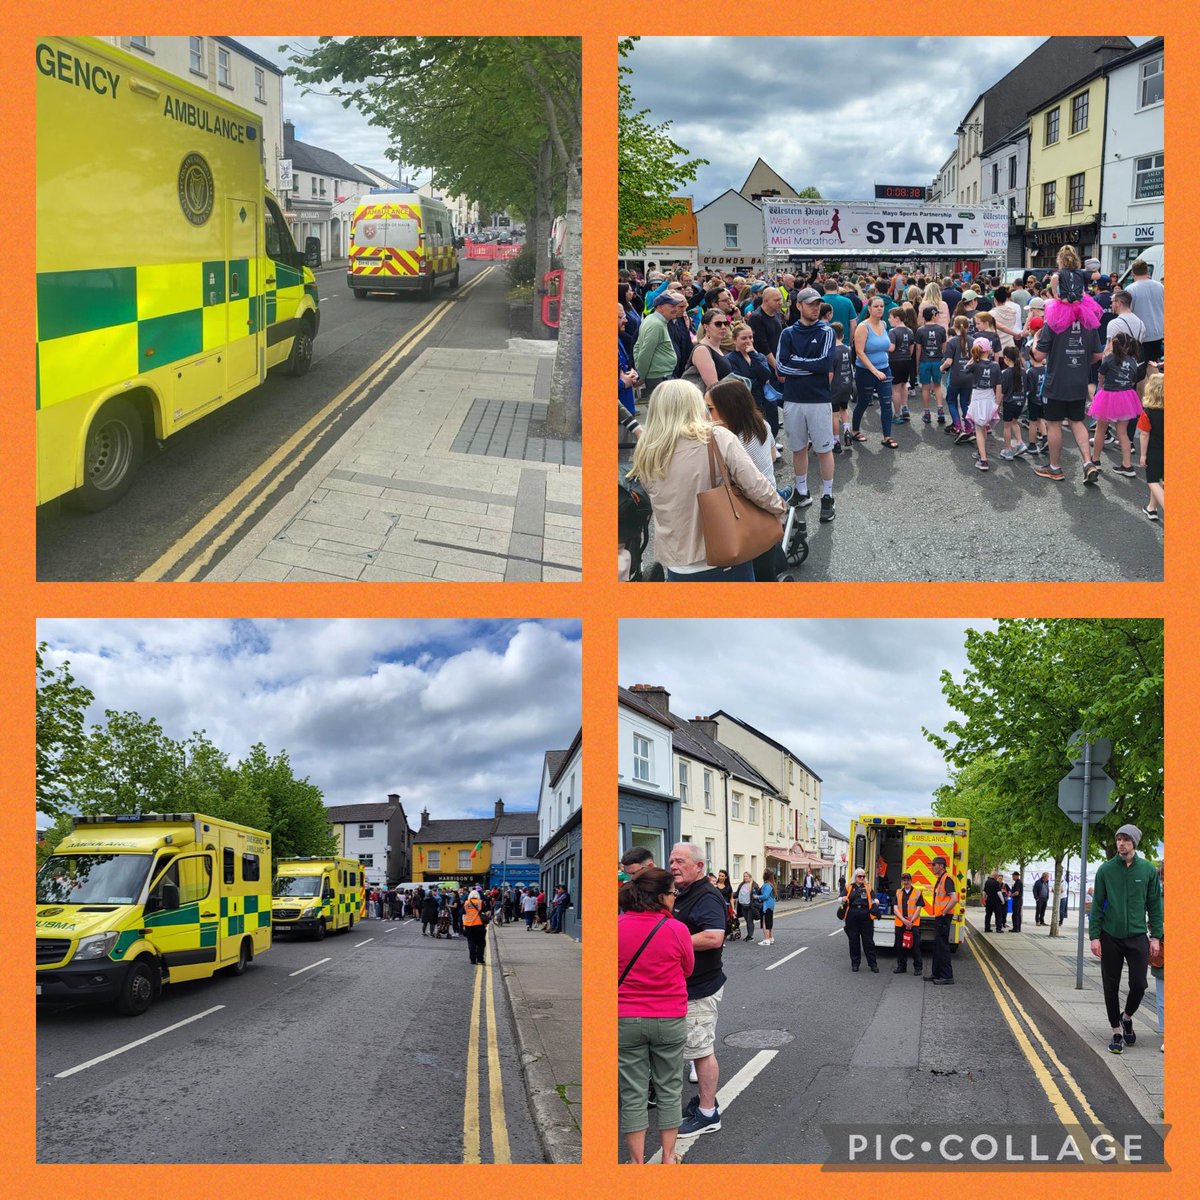 Today we deployed our team to support the @WOIMiniMarathon in #Ballina

We worked alongside @OrderofMaltaIRL #Ballina.

Thanks to all our team for your continued support and dedication 👏👏👏

#Community #VolunteerWork